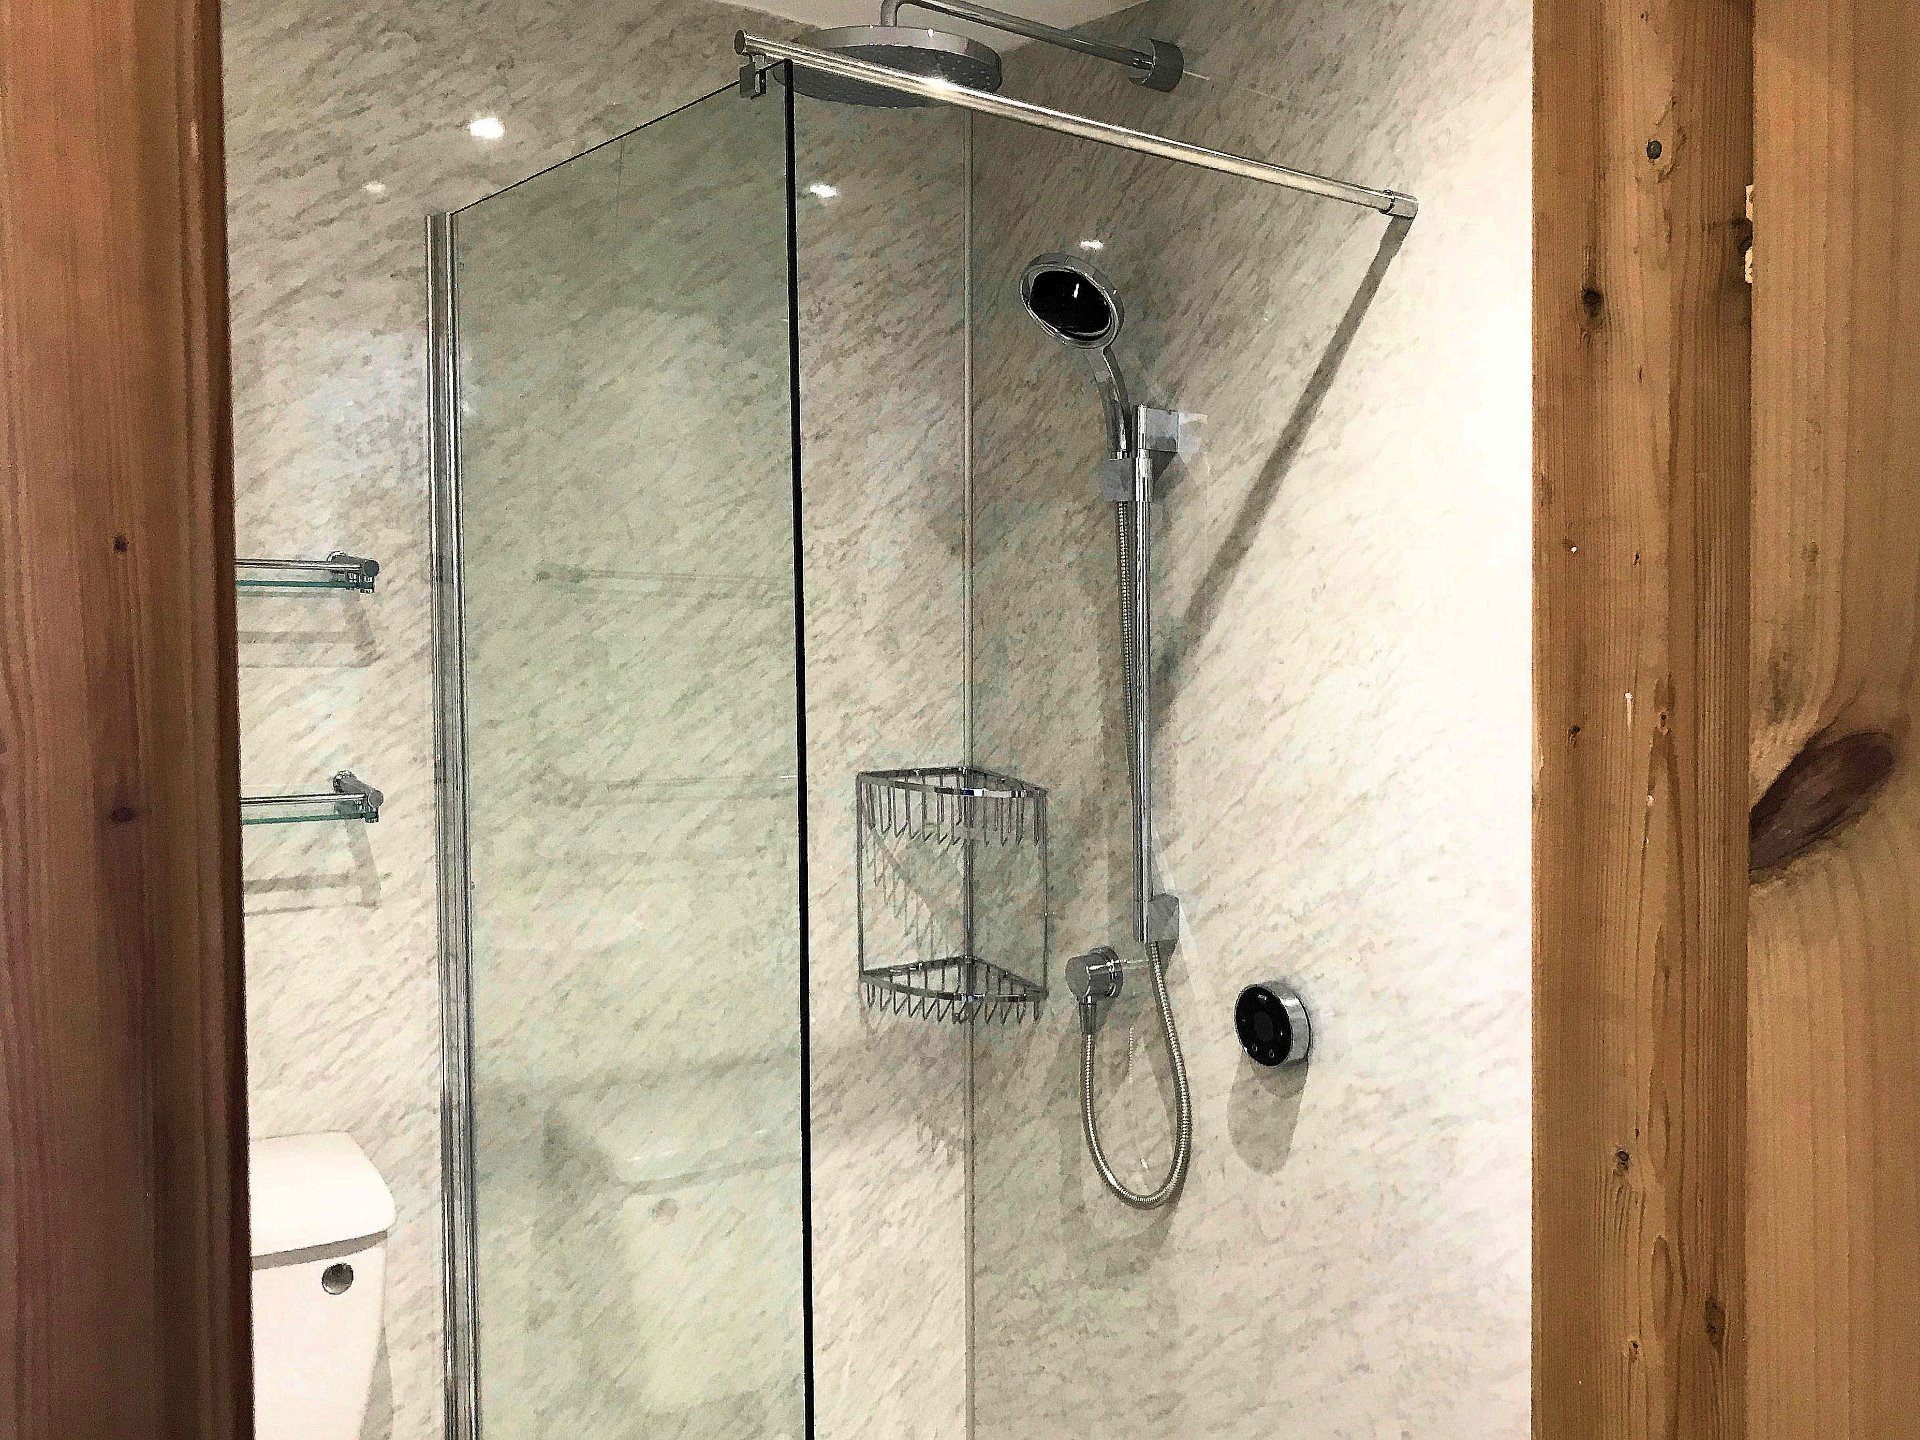 New WC, a digital controlled shower drench shower, vertical towel rail with matching wall fixtures shelves and baskets. Barnstaple North Devon